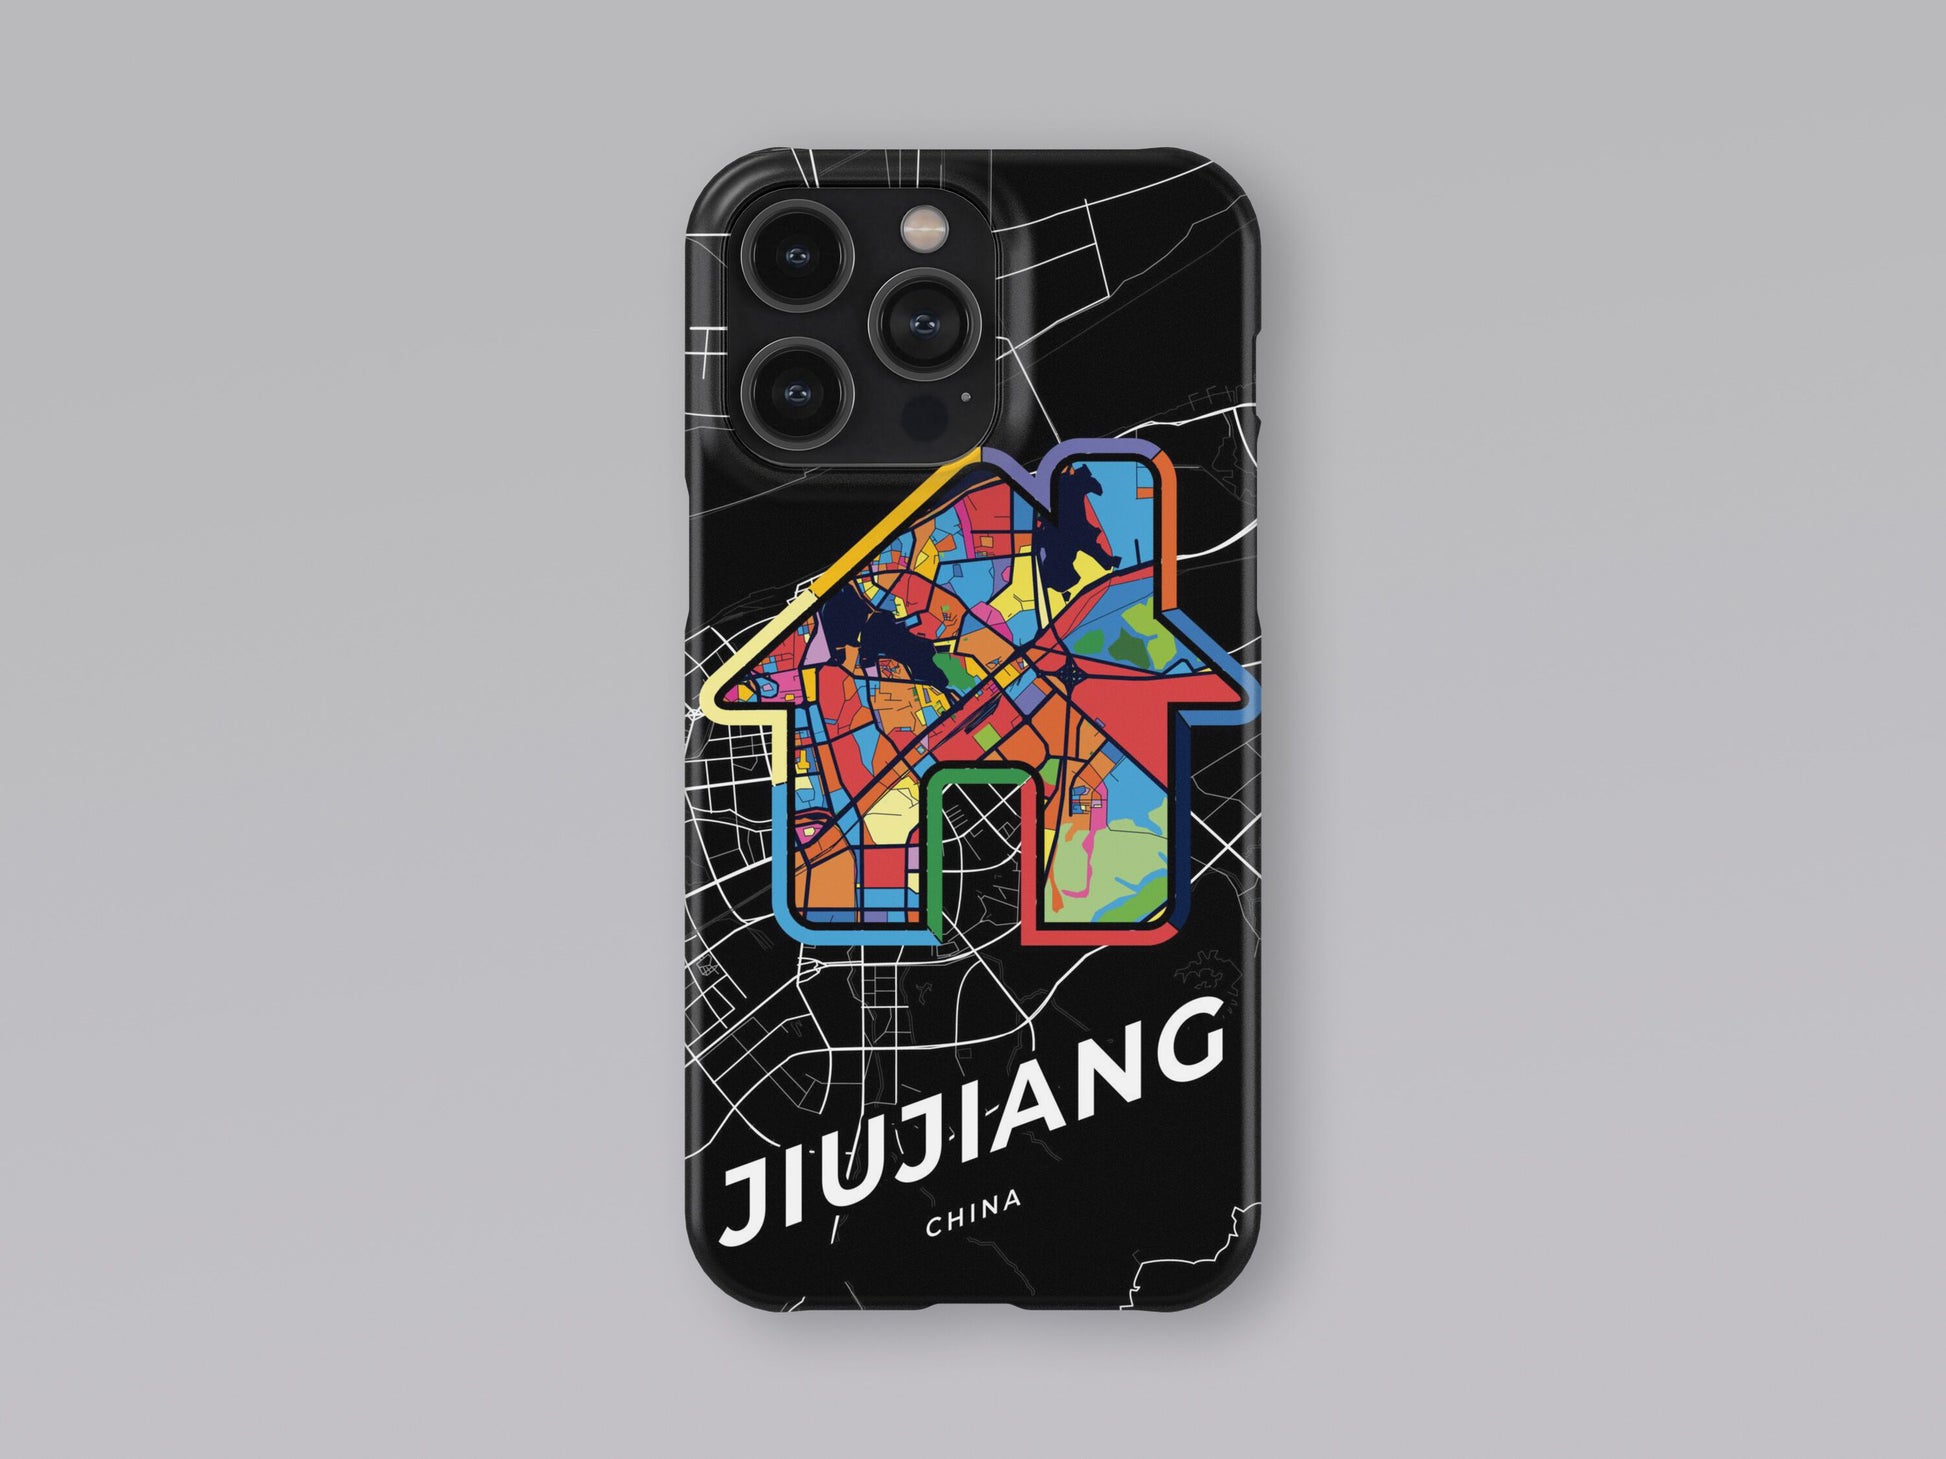 Jiujiang China slim phone case with colorful icon. Birthday, wedding or housewarming gift. Couple match cases. 3